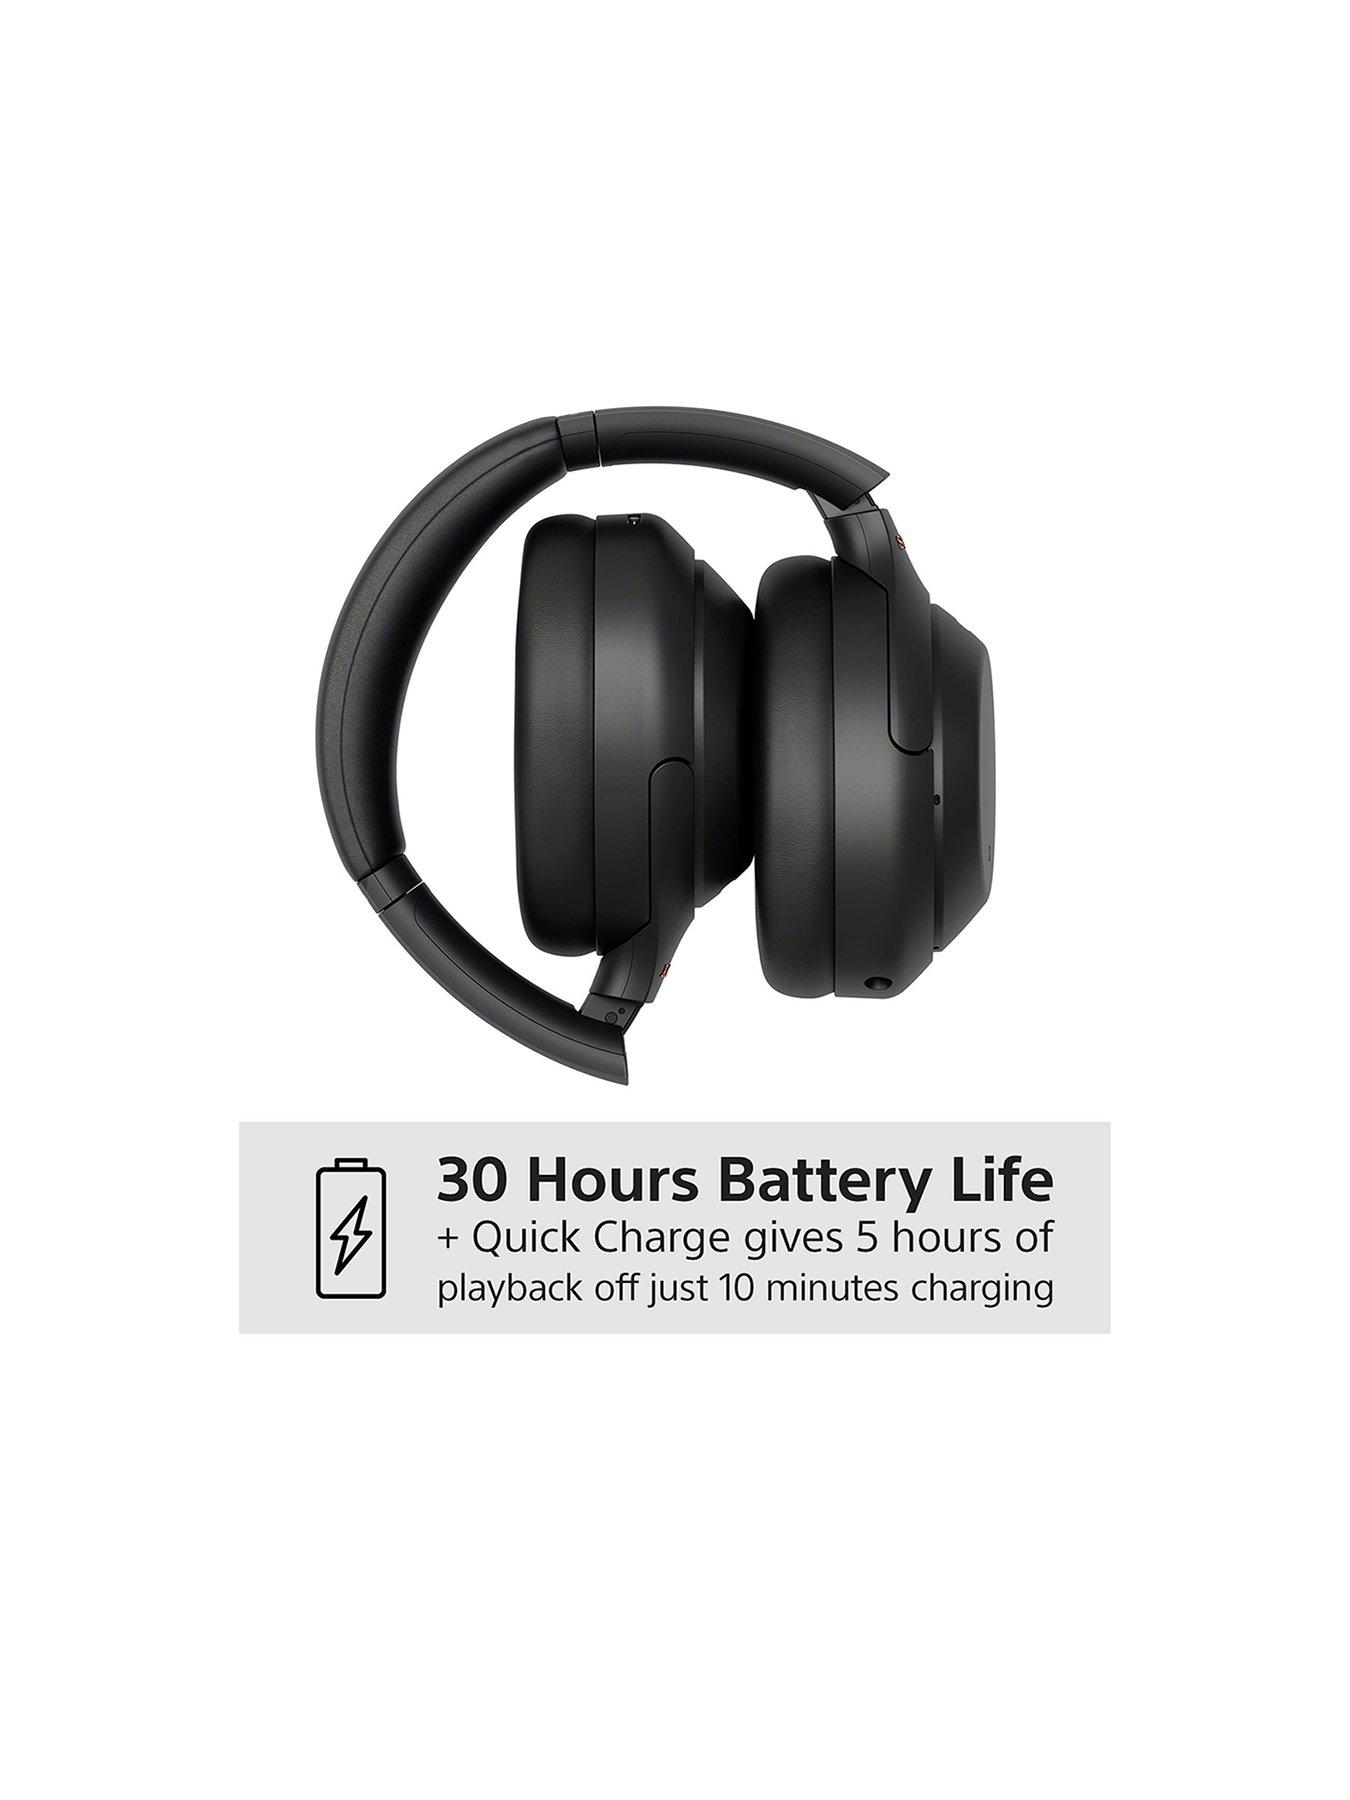 Sony WH-1000XM4 Noise-Cancelling Wireless Headphones